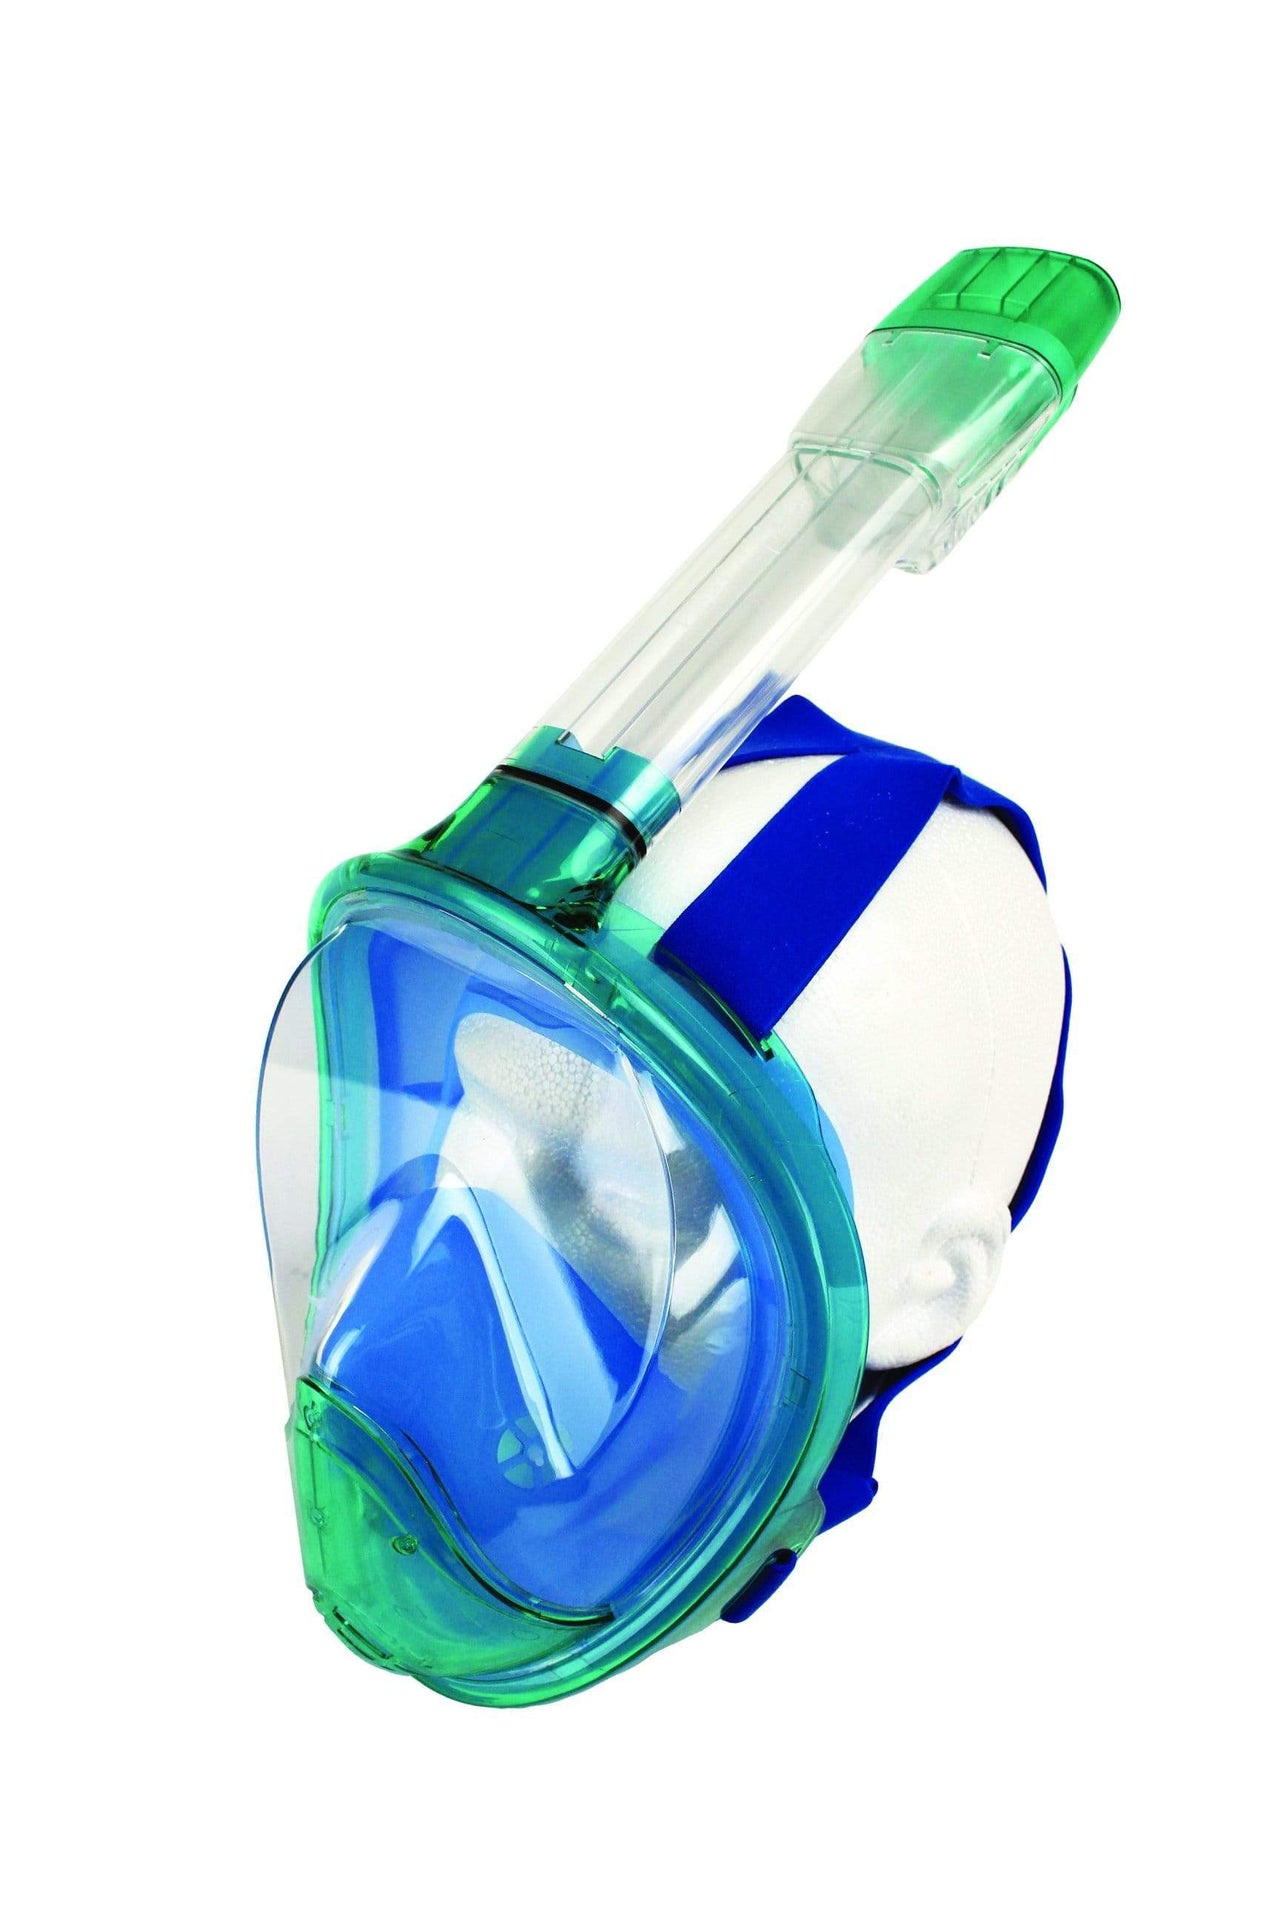 Reef Glider Full Face Snorkel Mask Set with Action Cam Mount blue emerald